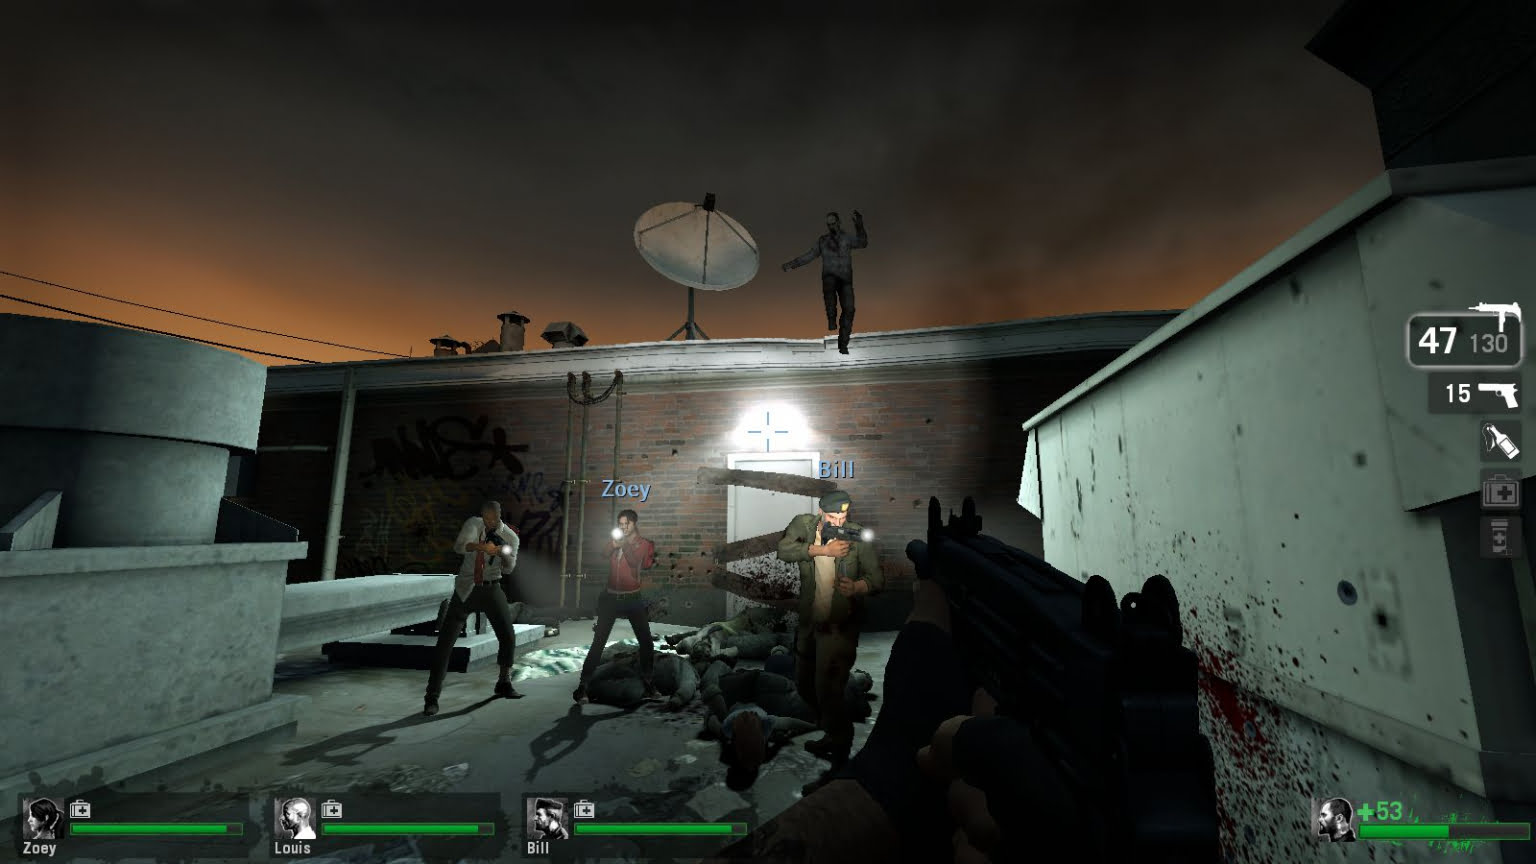 download left 4 dead free for pc